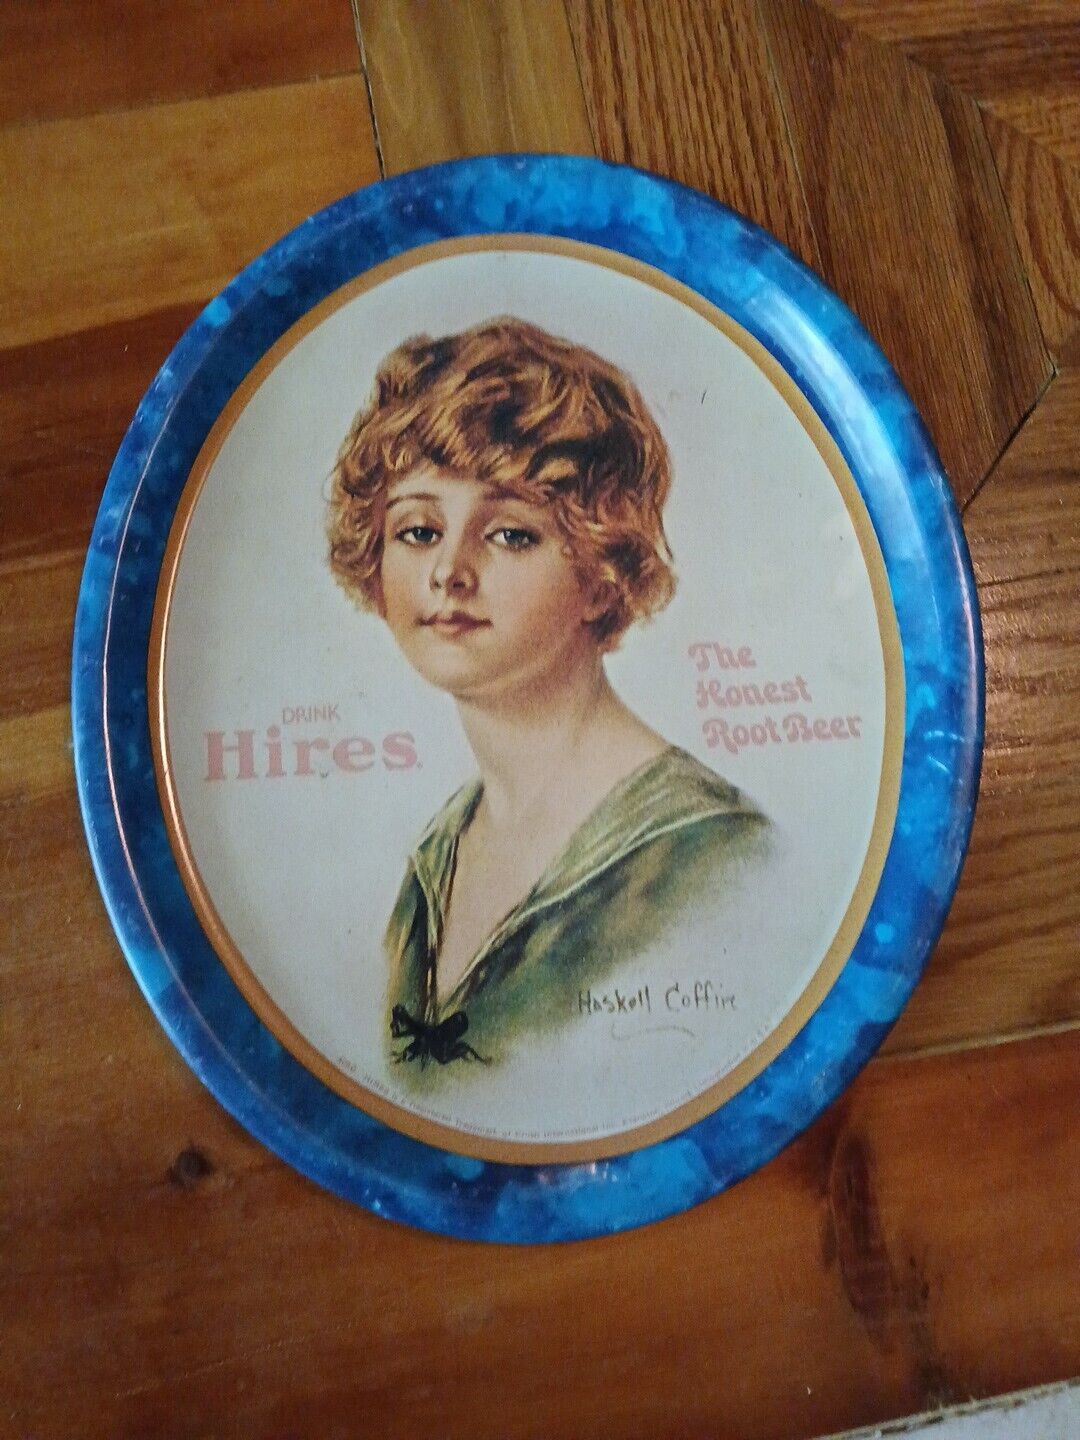 Vintage Hires Honest Root Beer Lady Oval Tin Tray William Haskell Coffin 4050